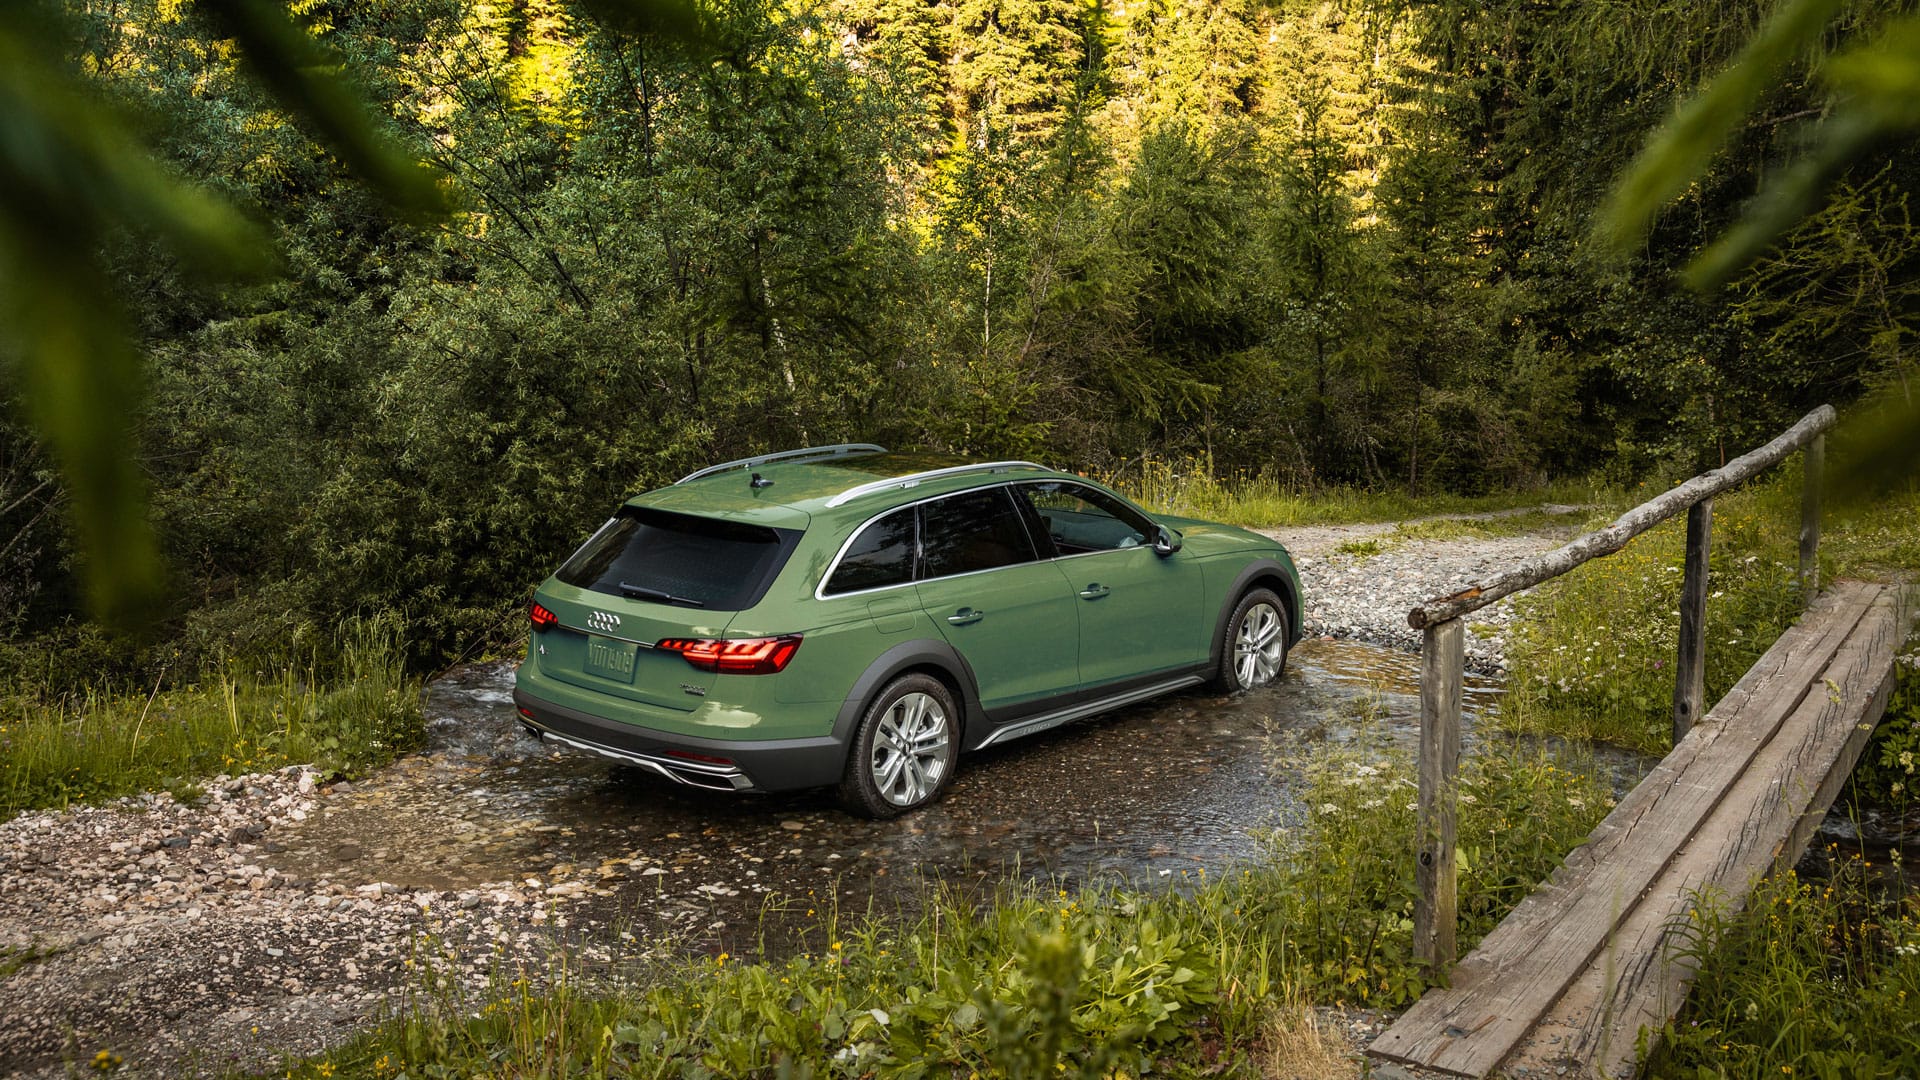 The Audi A4 allroad: A Refined Wagon Ready for Adventure